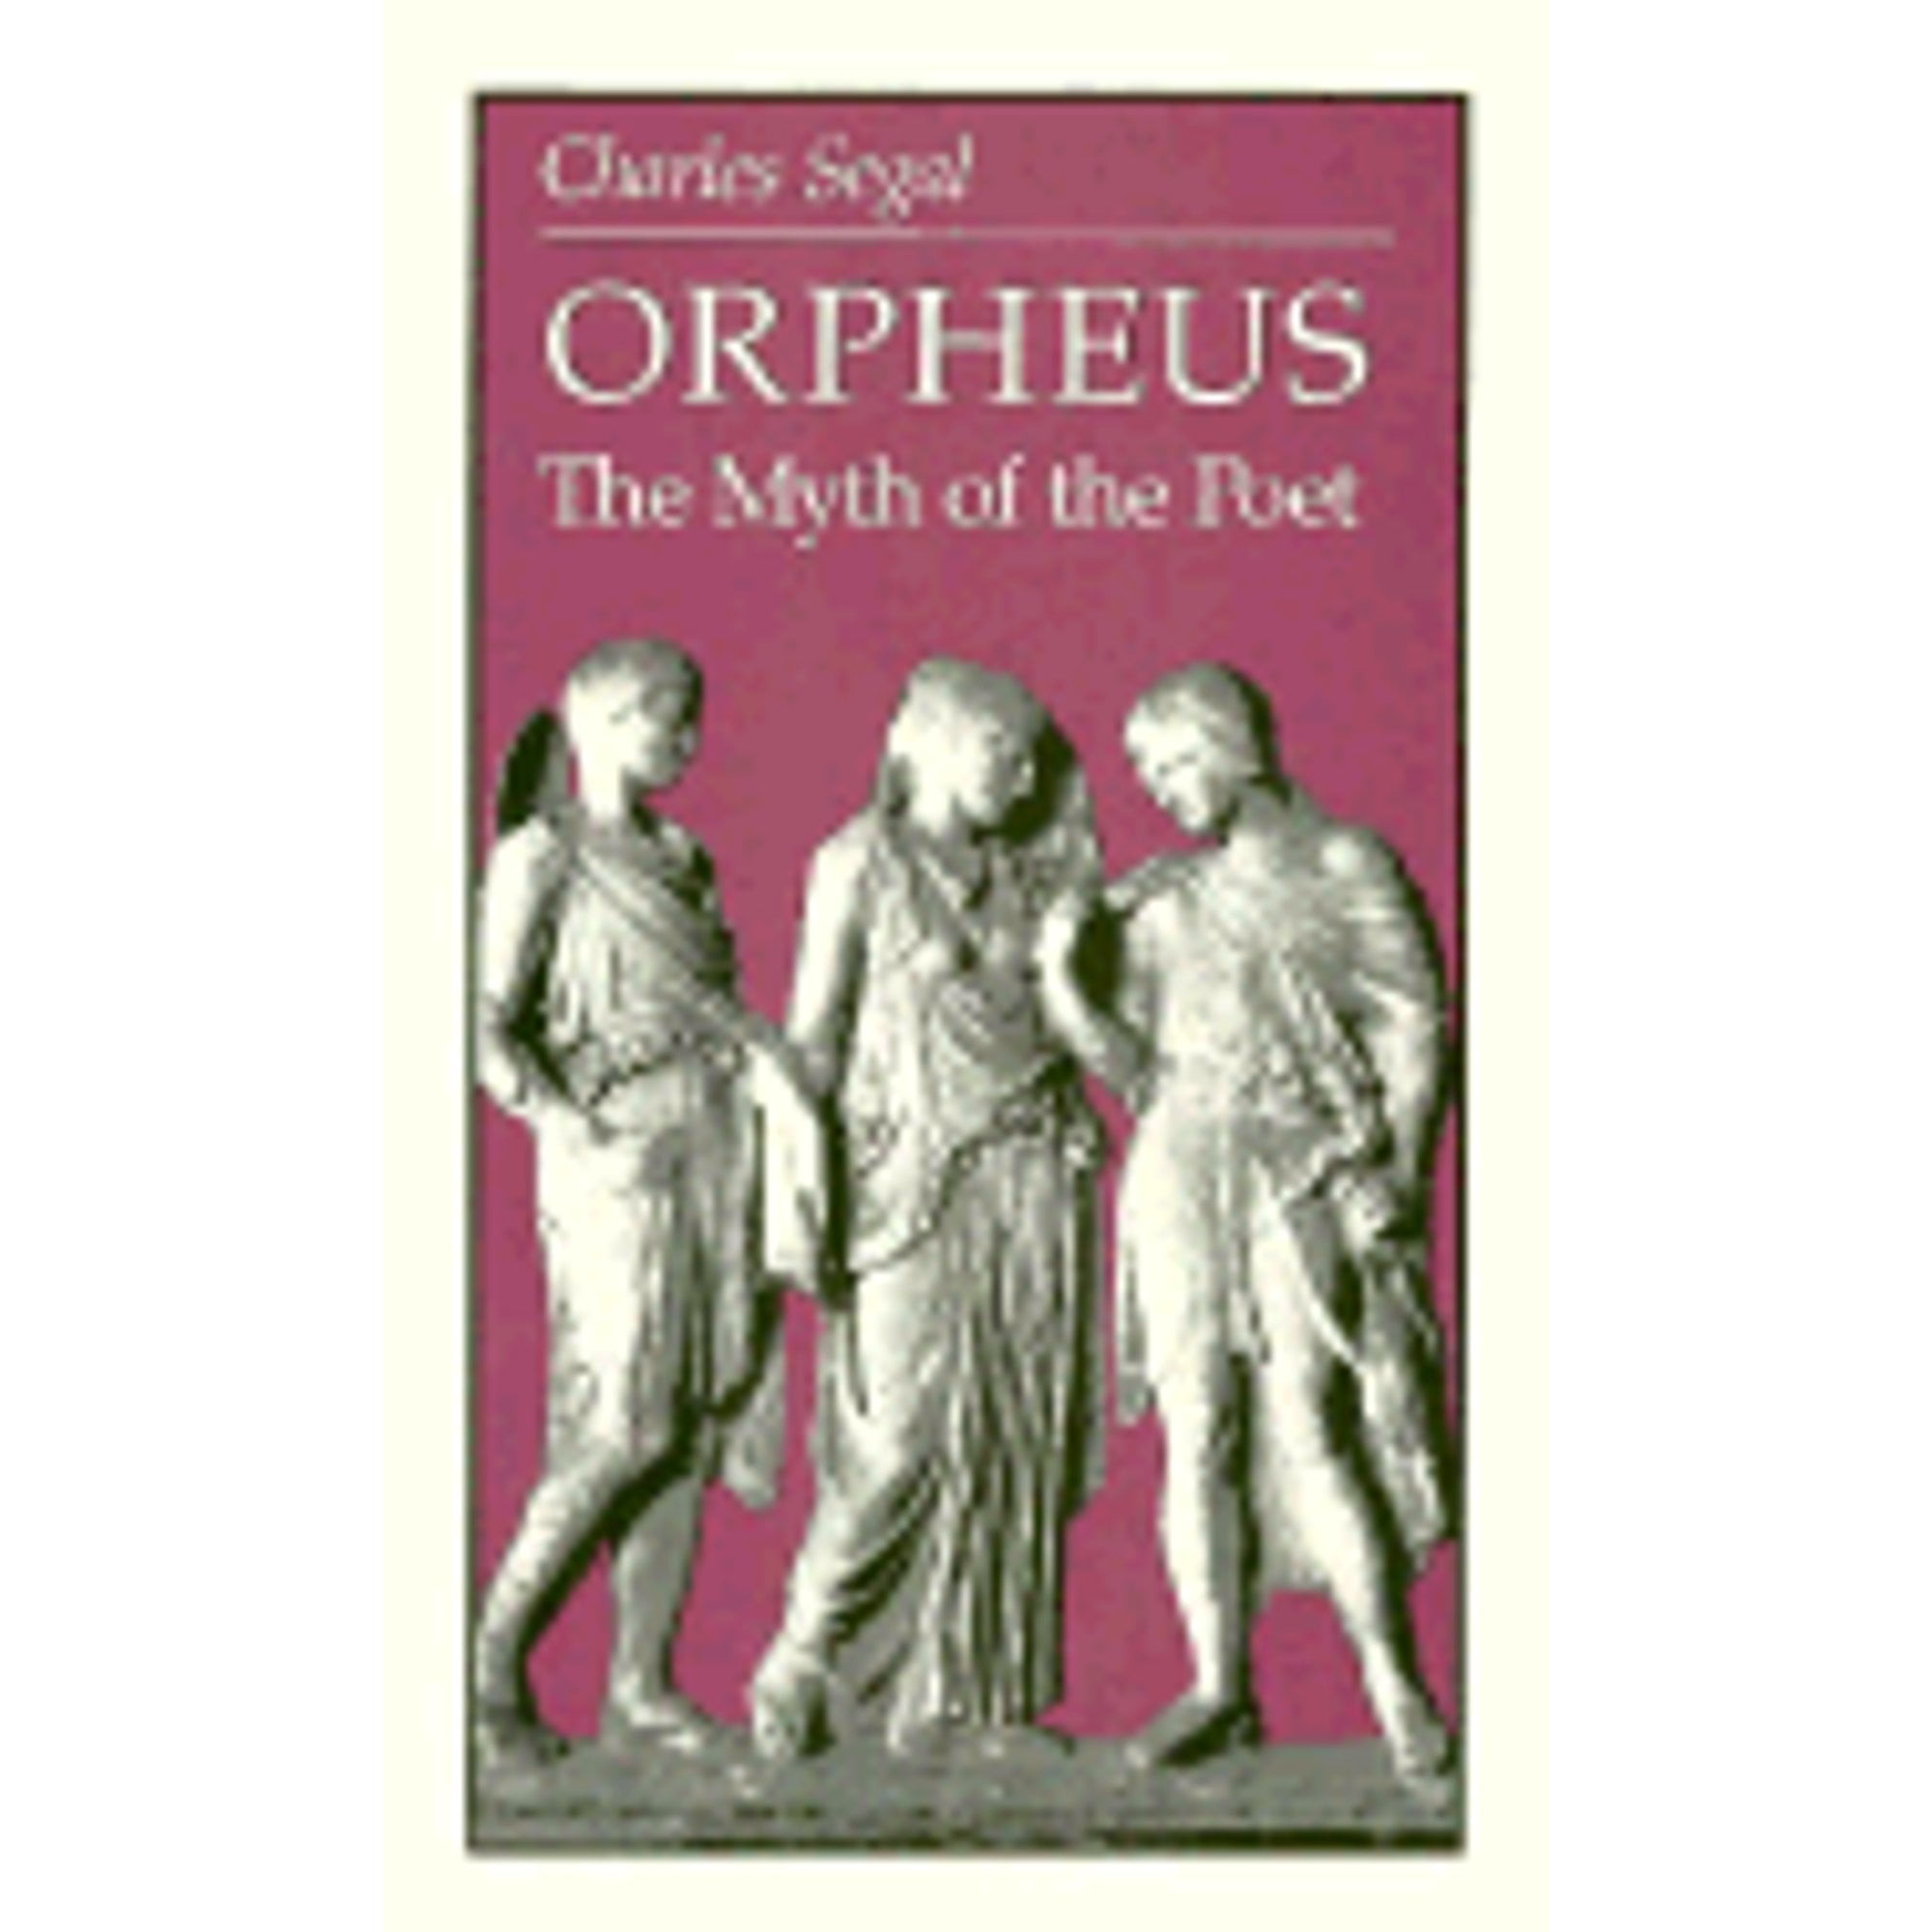 Pre-Owned Orpheus: The Myth of the Poet (Paperback) by Charles Segal